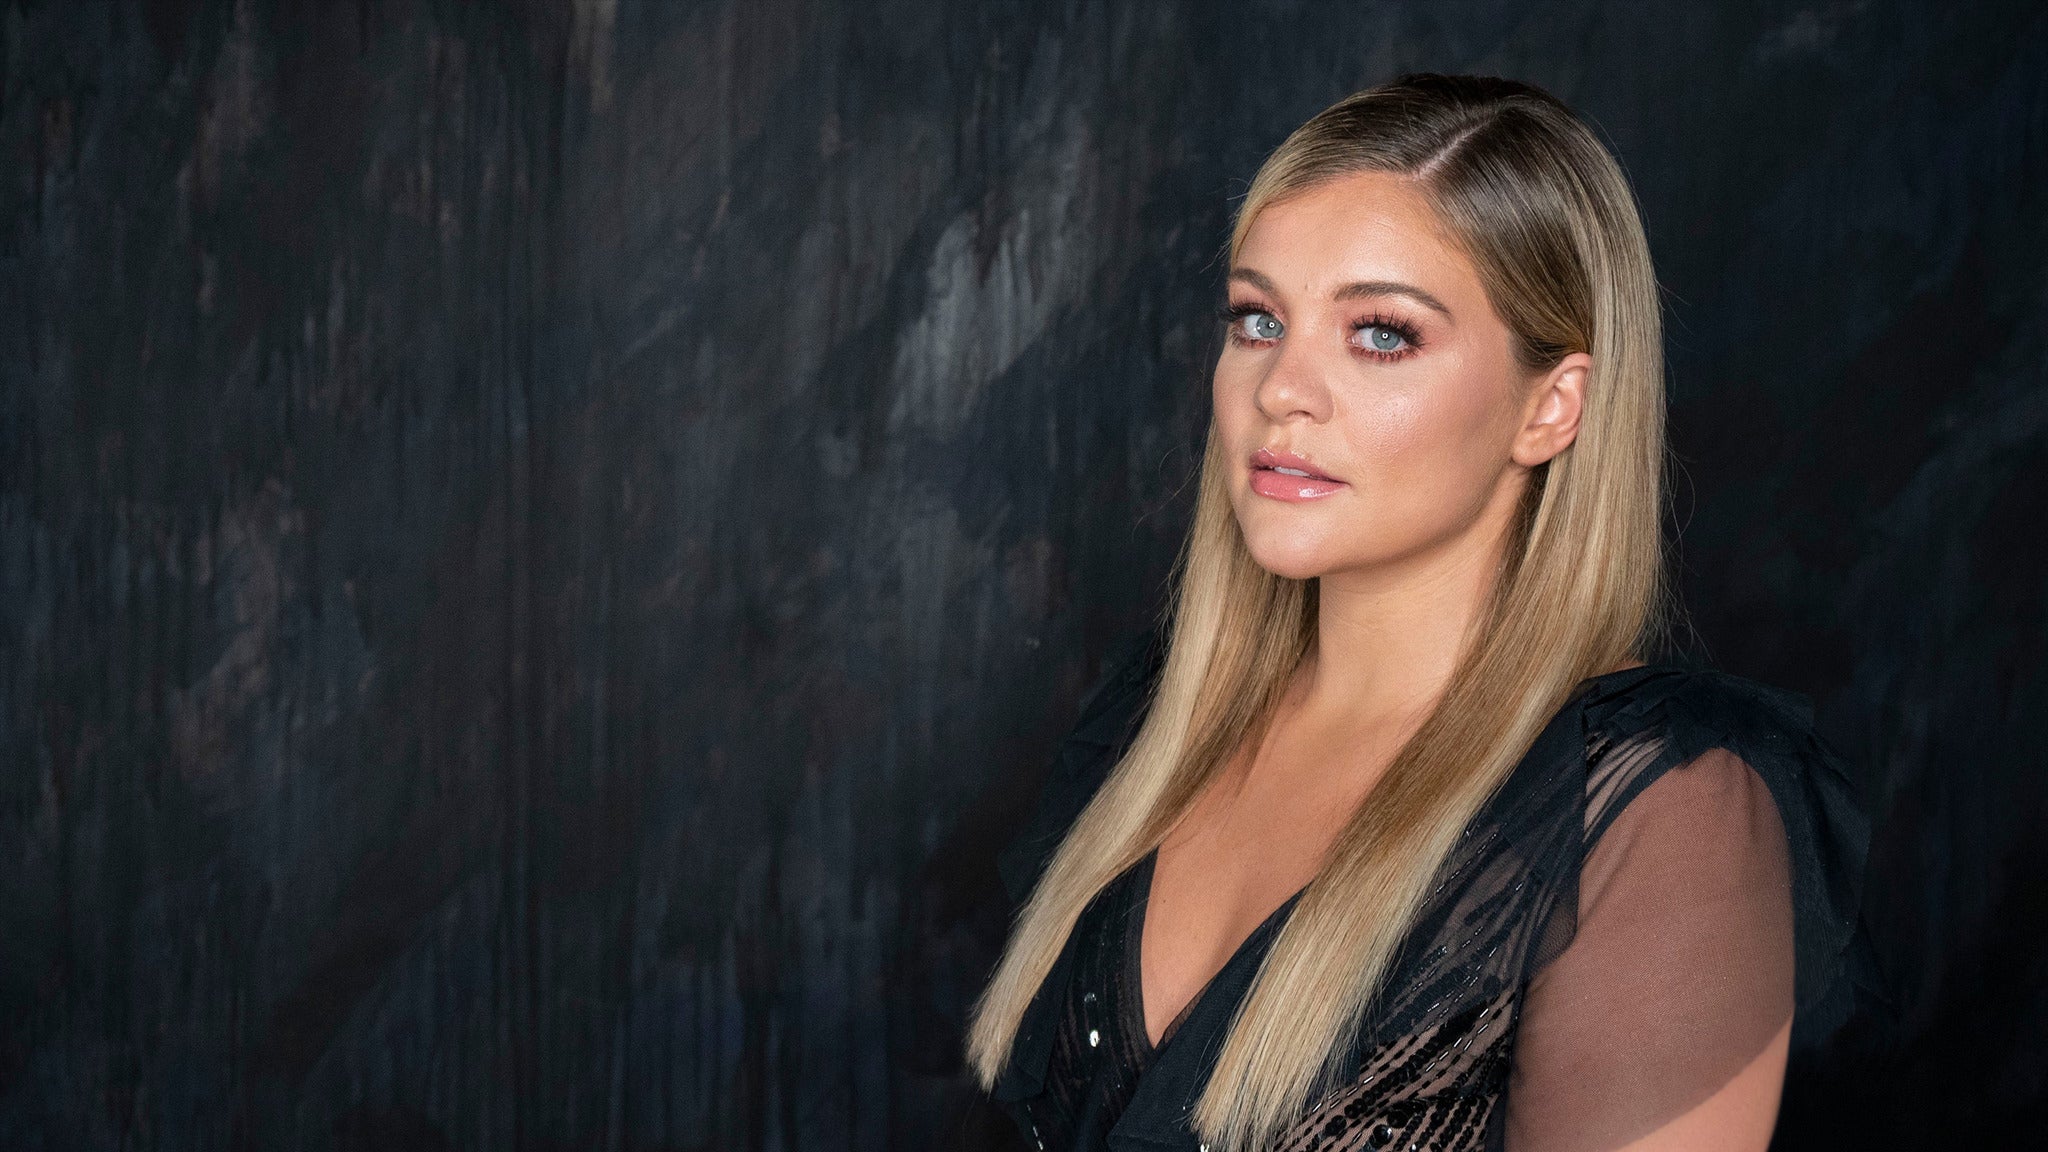 Top Of The World Tour: Lauren Alaina Presented by maurices in Asbury Park promo photo for VIP Package Onsale presale offer code